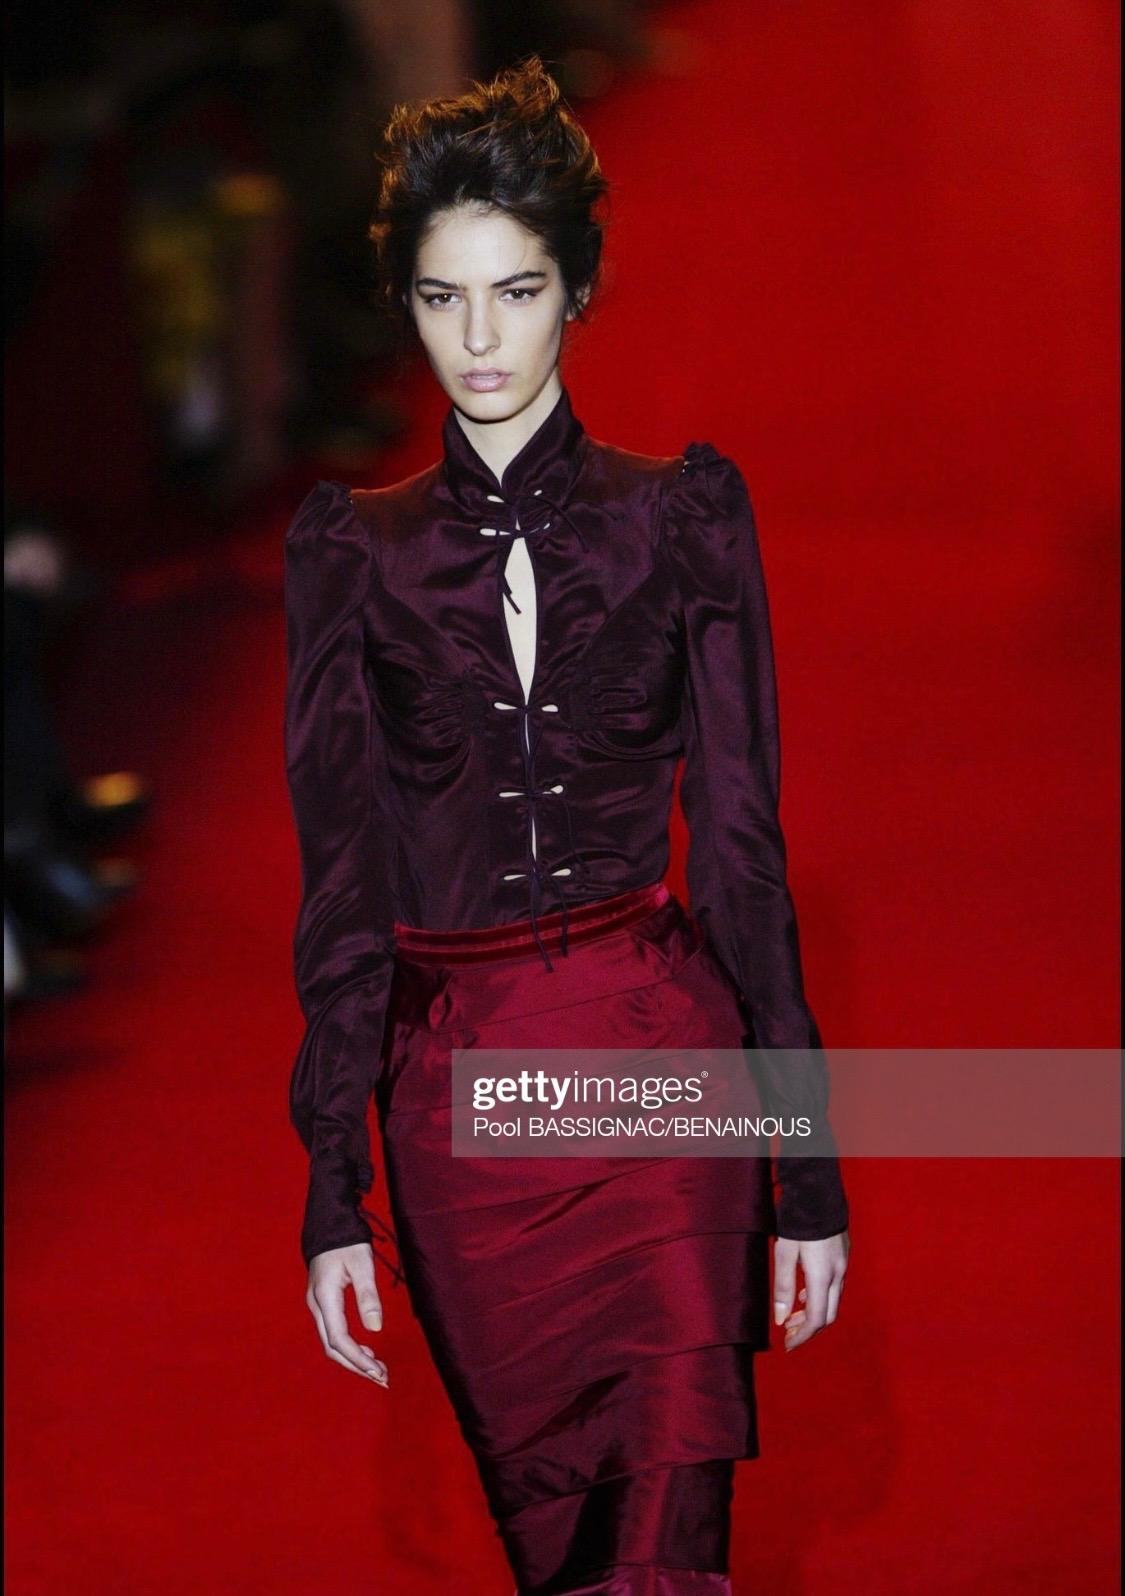 Presenting a gorgeous burgundy satin chinoiserie top, designed by Tom Ford for Yves Saint Laurent Rive Gauche. This gorgeous shirt was masterfully designed by Tom Ford who reintroduced exaggerated pagoda shoulders to create the appearance of a